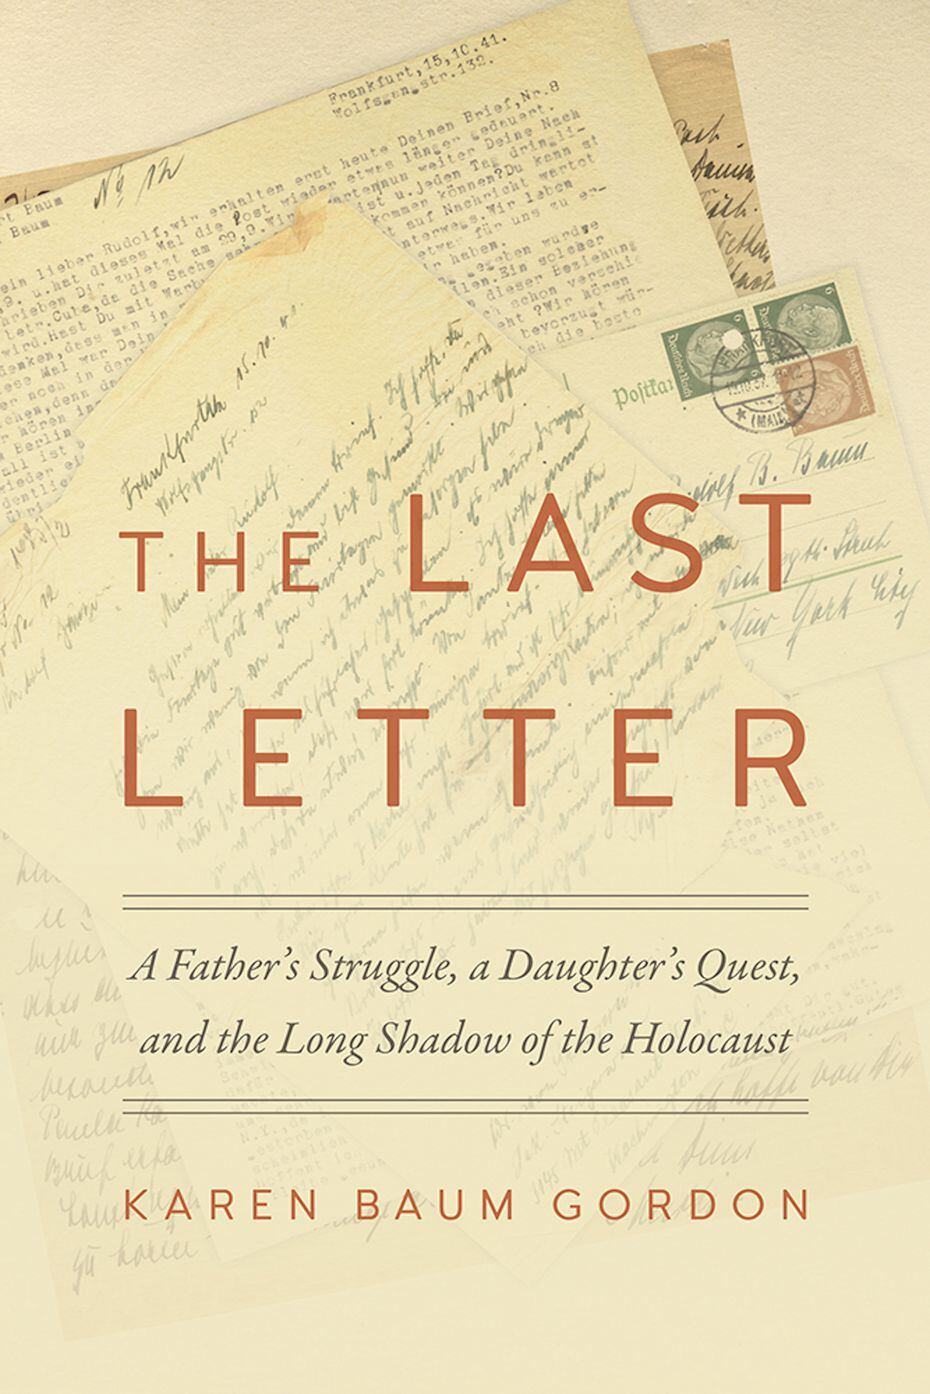 The cover of "The Last Letter: A Father's Struggle, a Daughter's Quest, and the Long Shadow...